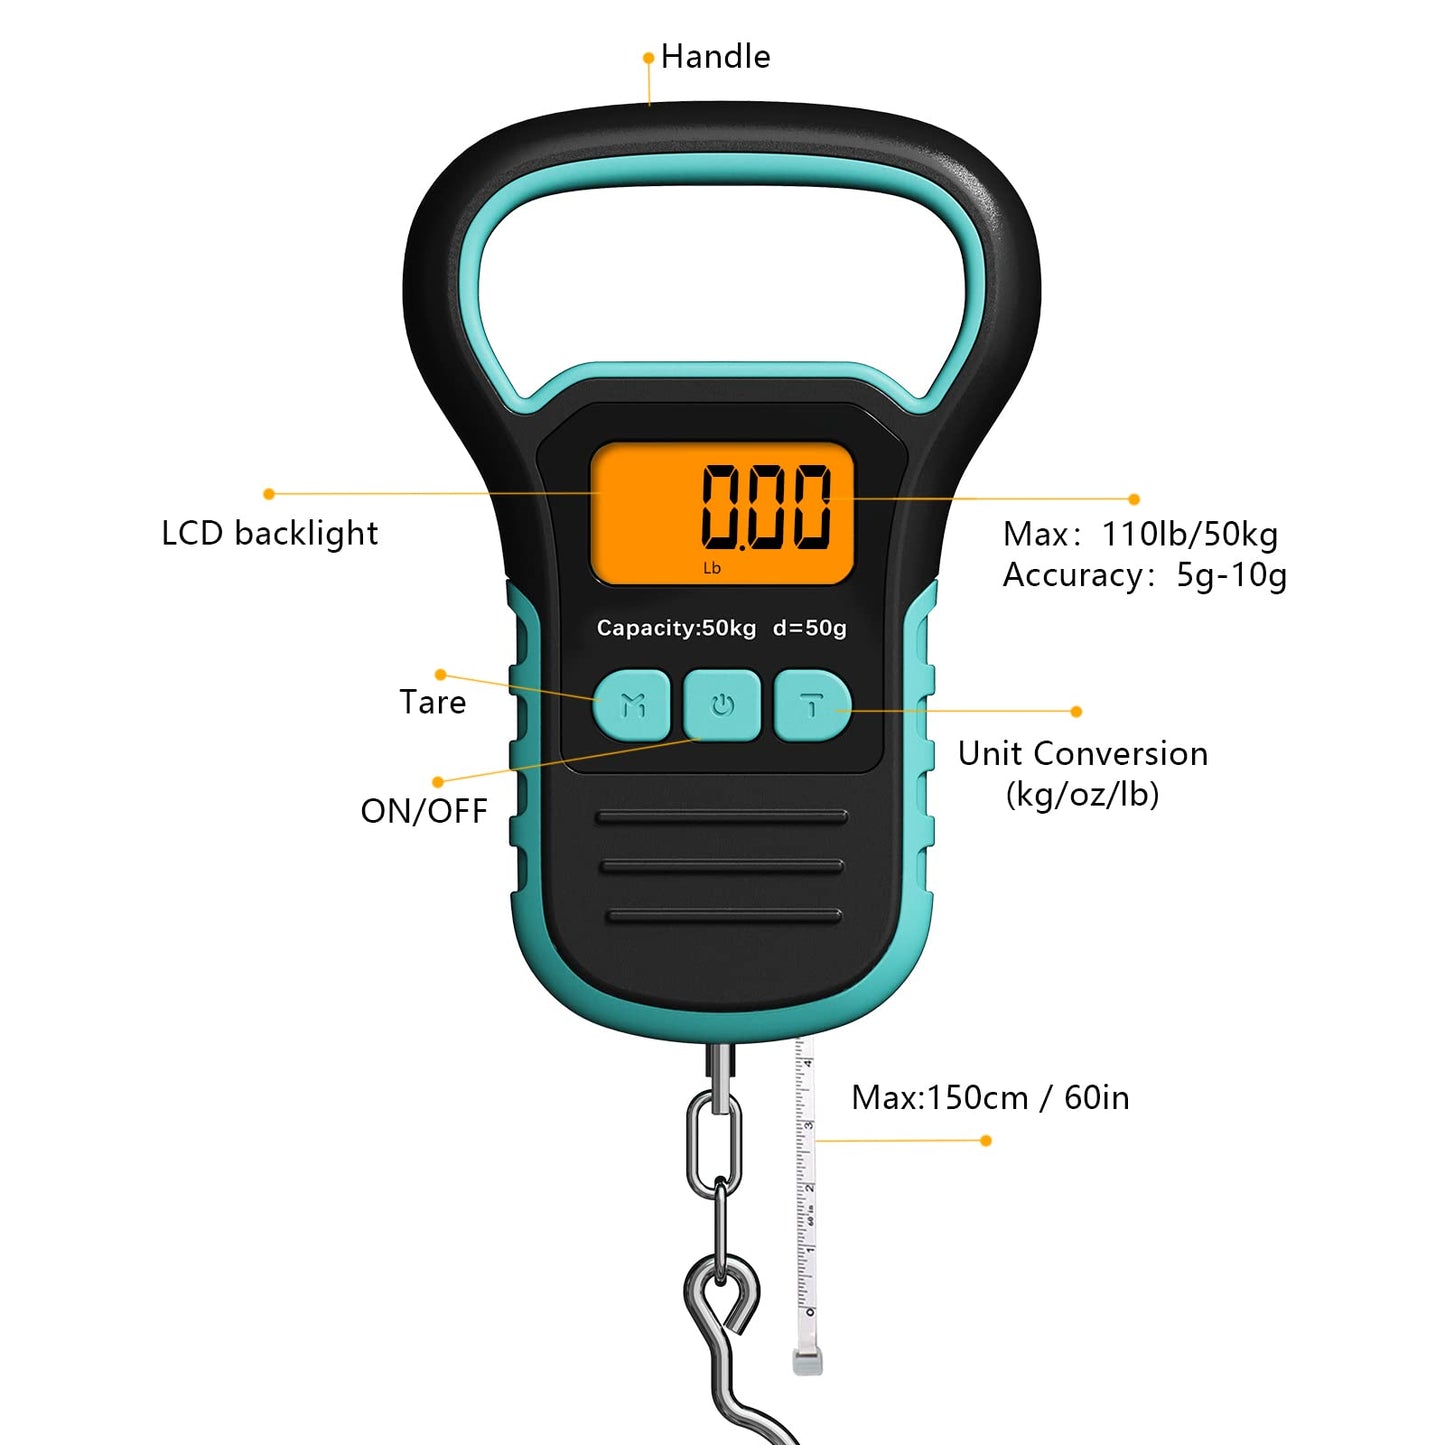 UNIWEIGH Digital Fishing Scale with Lip Gripper,Tape and Ruler,110lb/50kg Postal Hanging Luggage Scale with Hook，Waterproof Handing Scale for Home and Outdoor